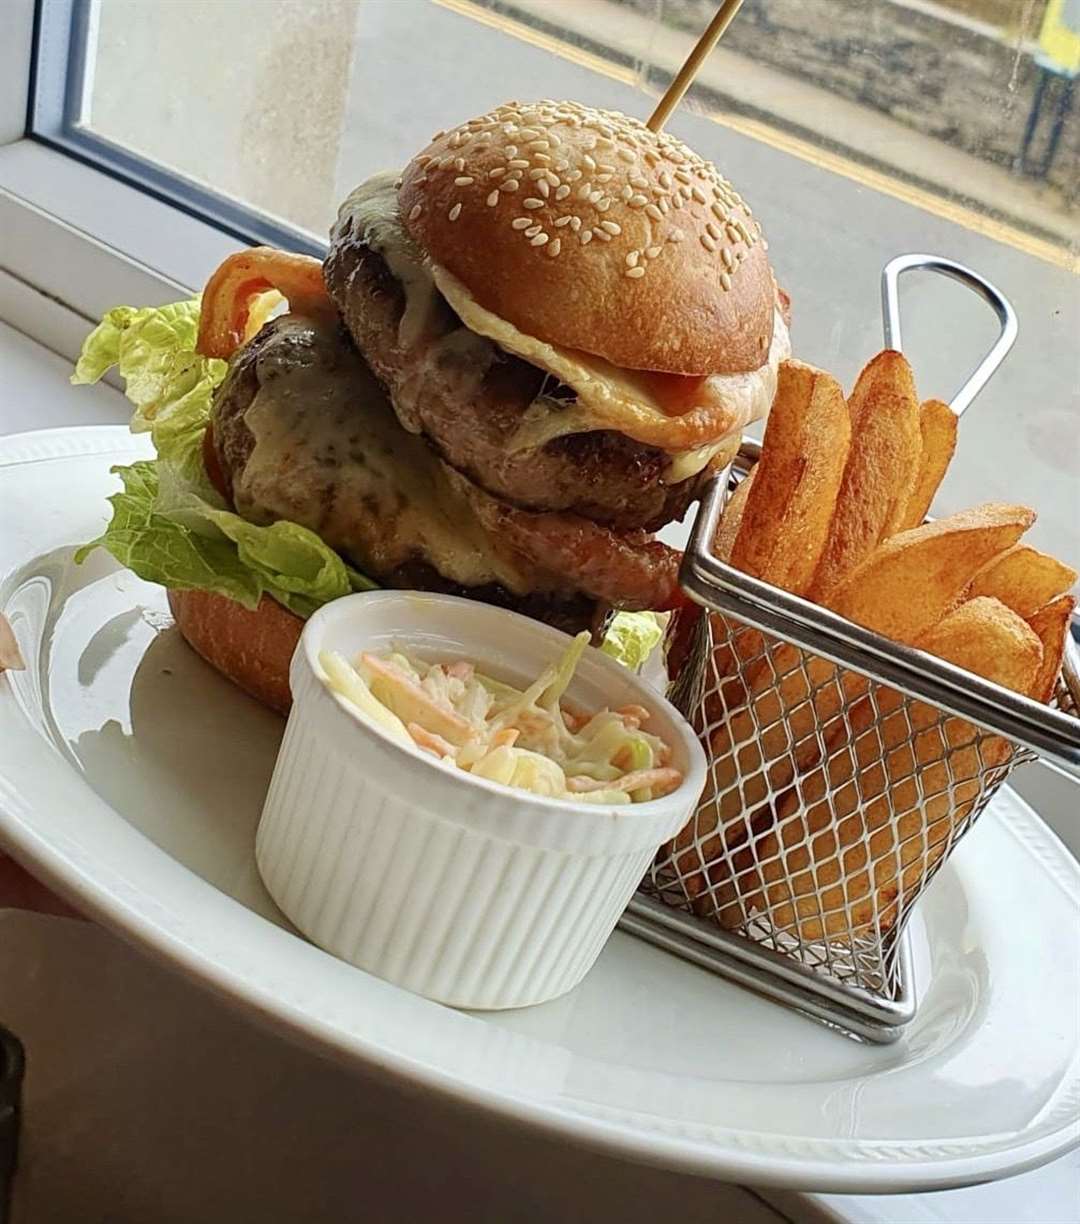 Mackays Hotel's double beefburger has proved popular.